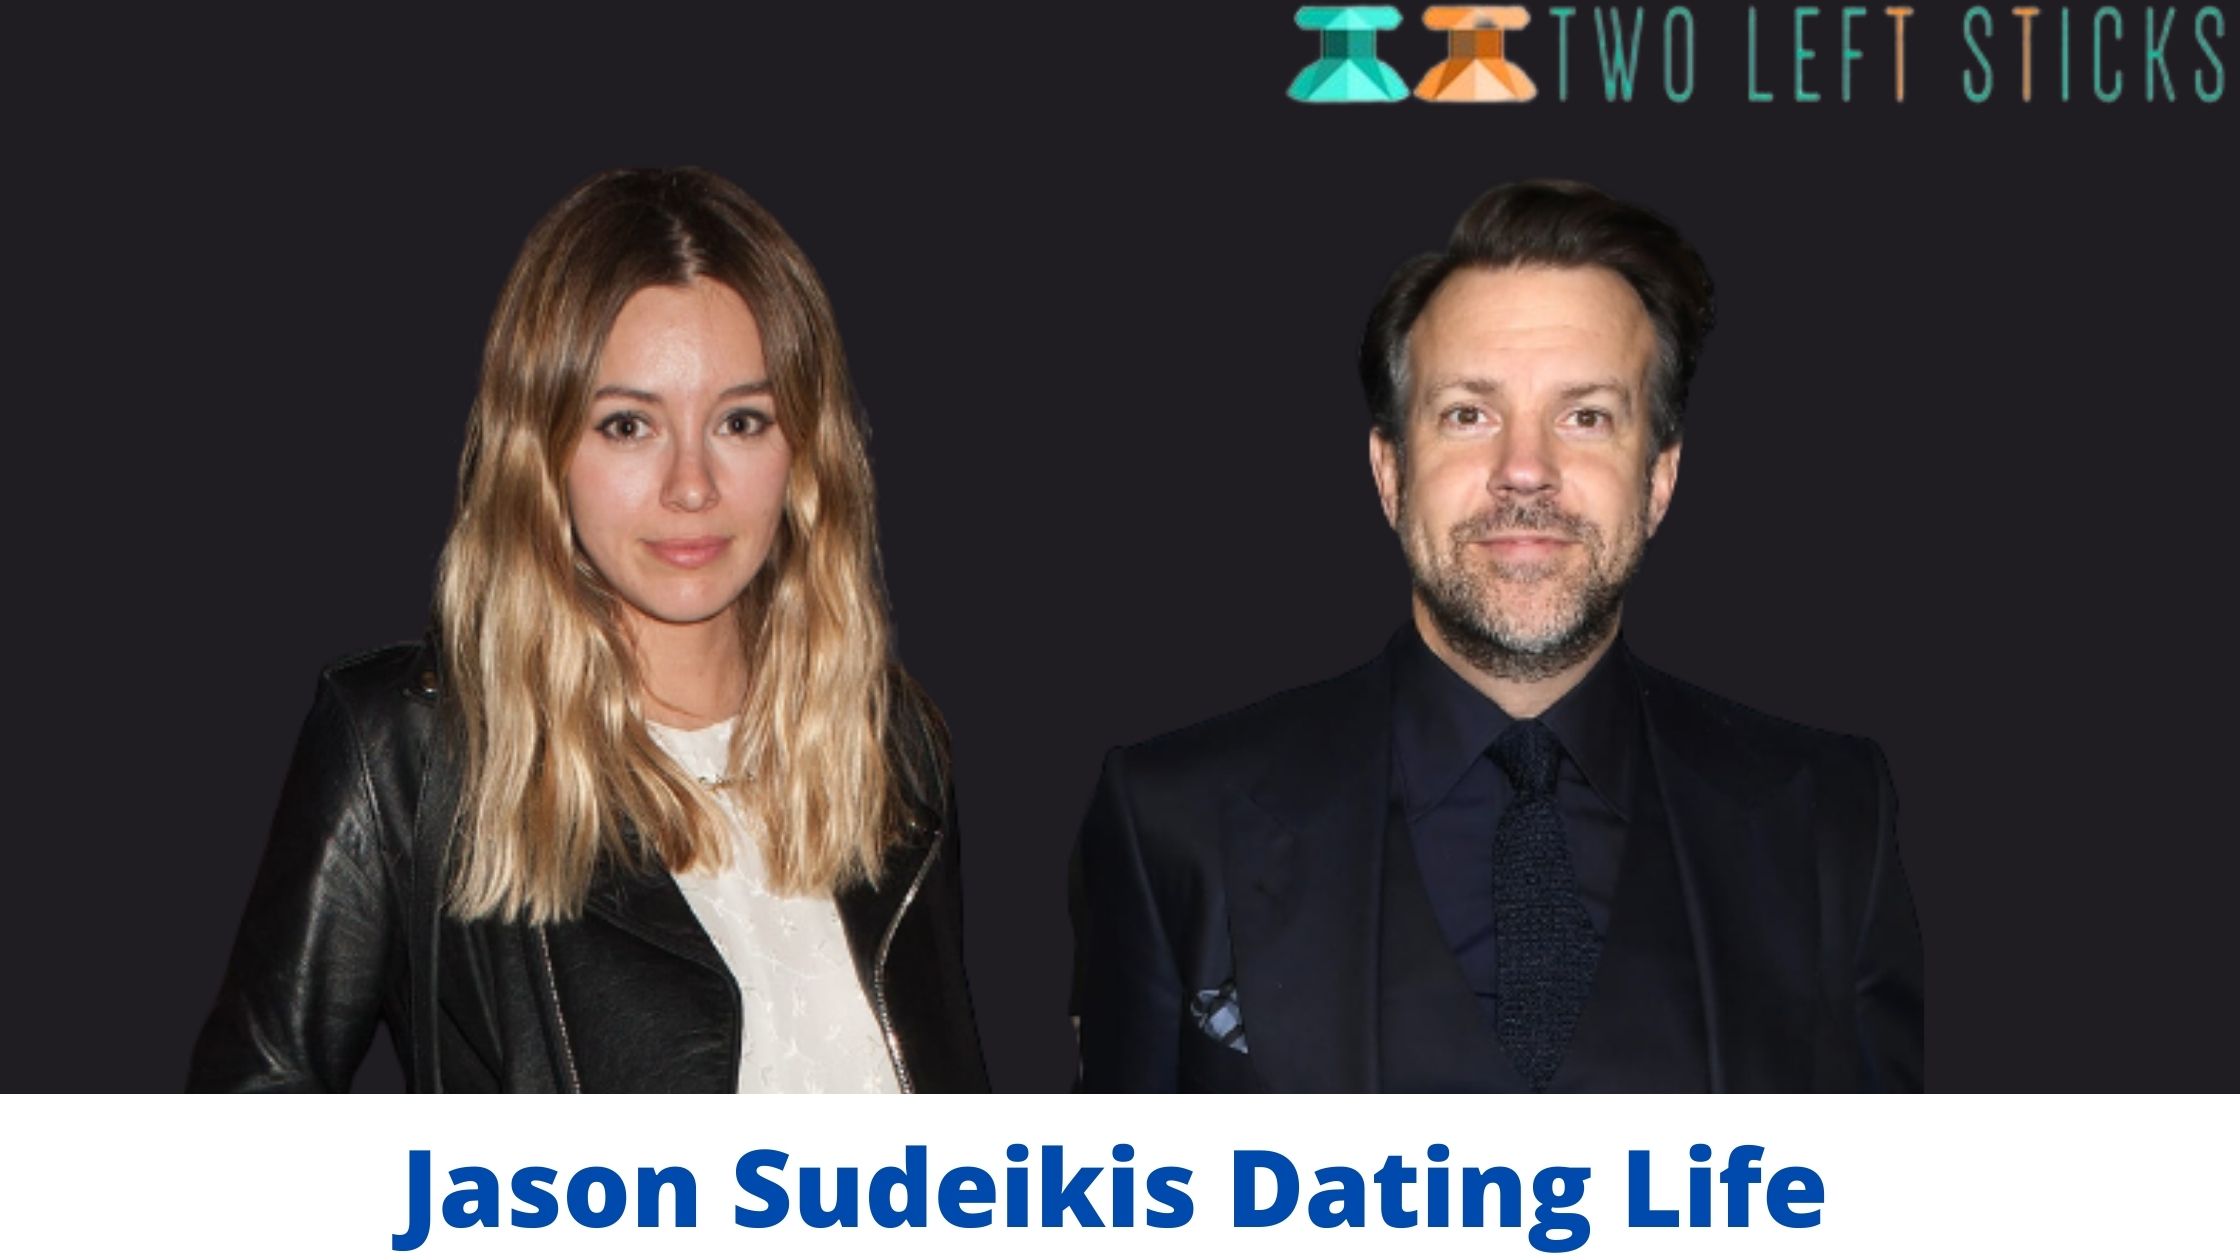 Jason Sudeikis Dating Life- His relationship with Keely Hazell has ended.